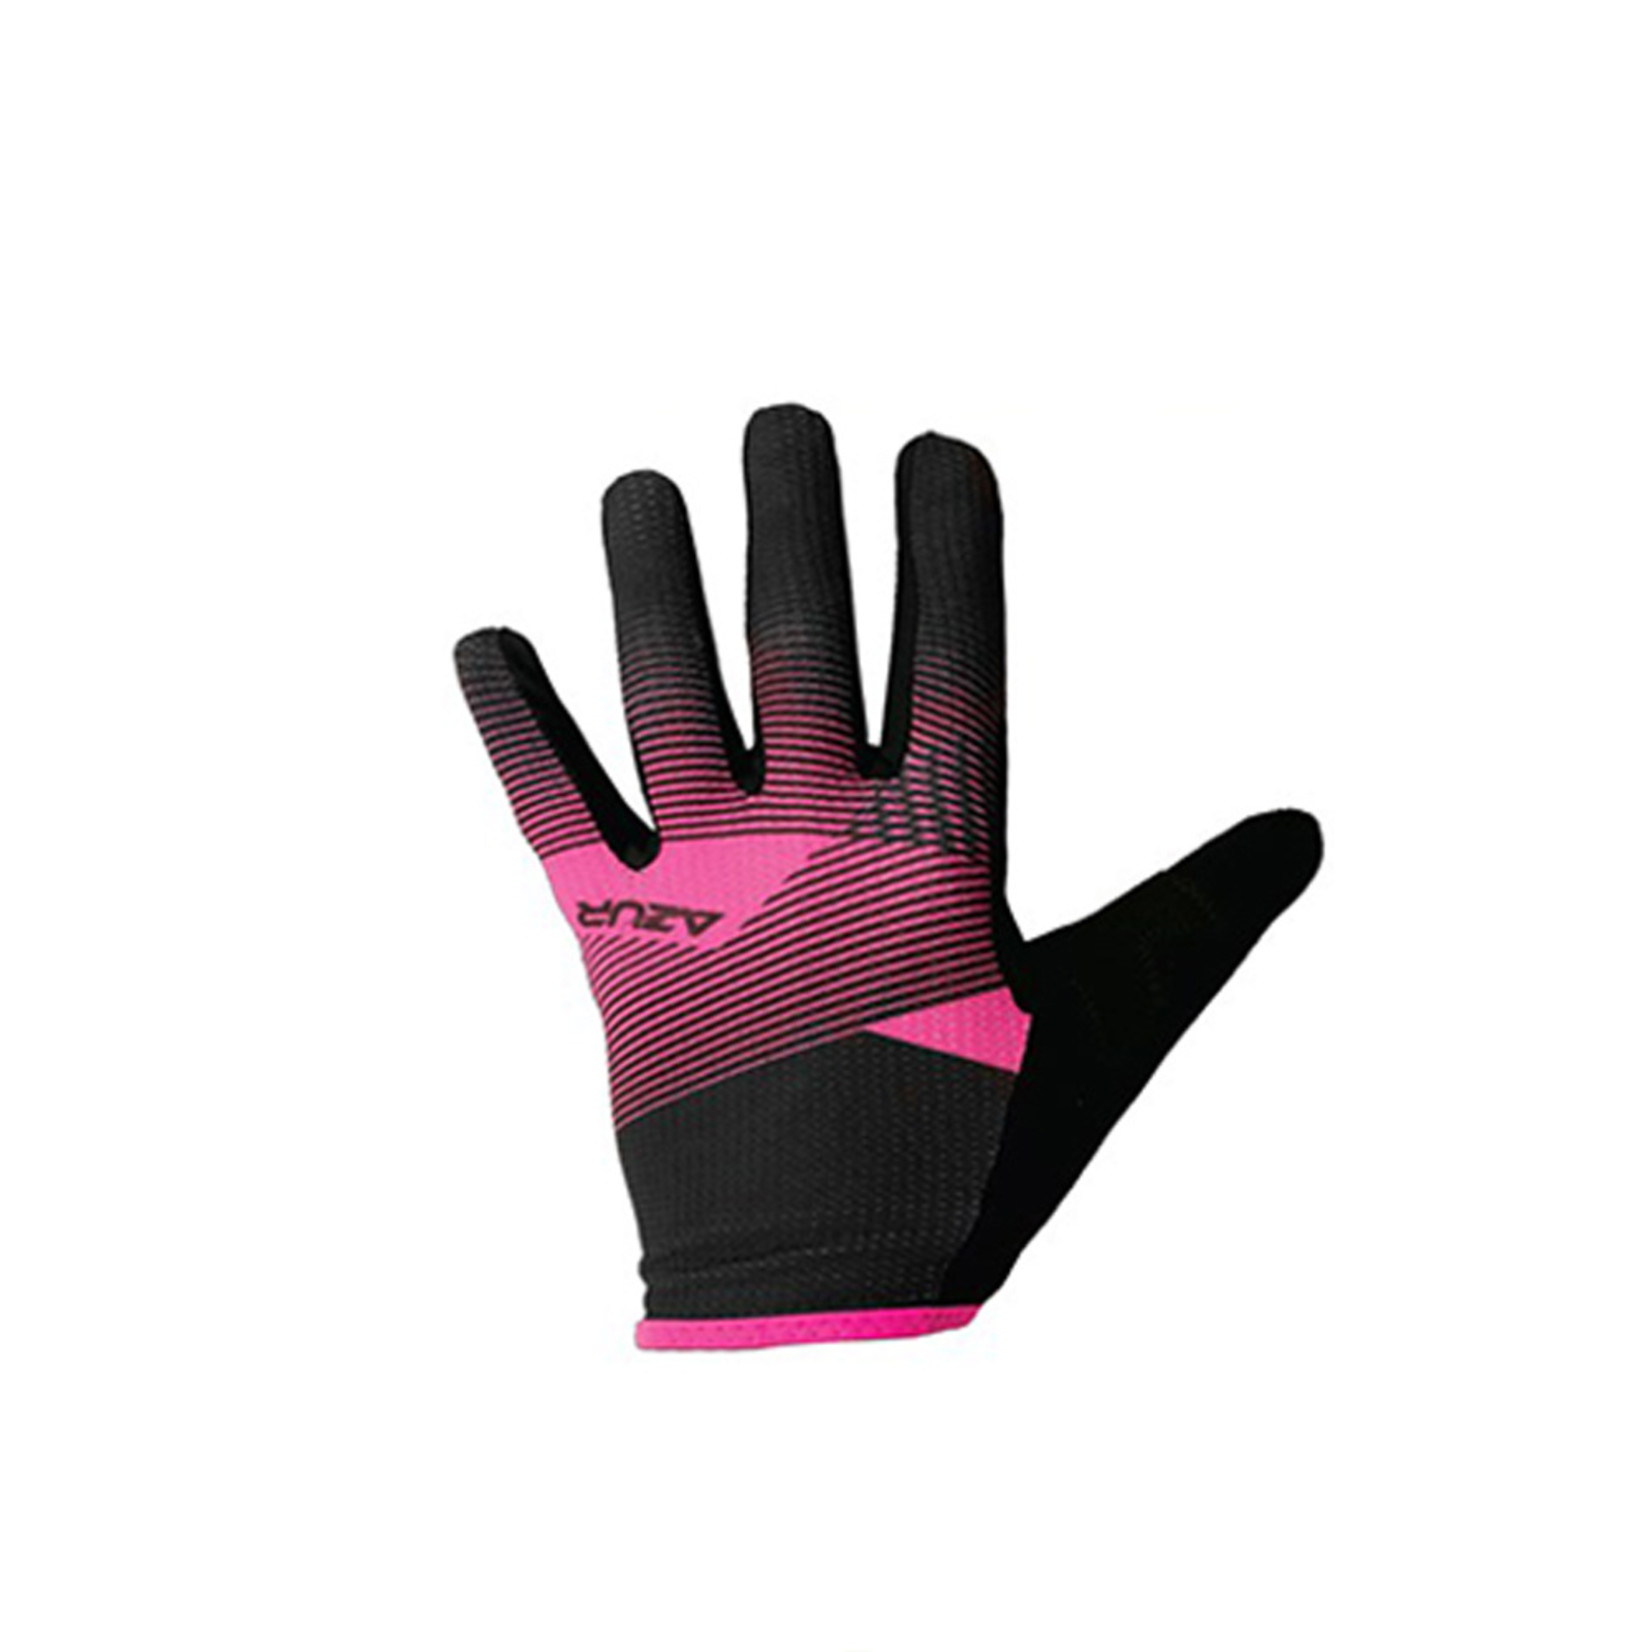 Azur Azur Bike/Cycling Gloves - L60 Series - Pink - Medium Material Breathable